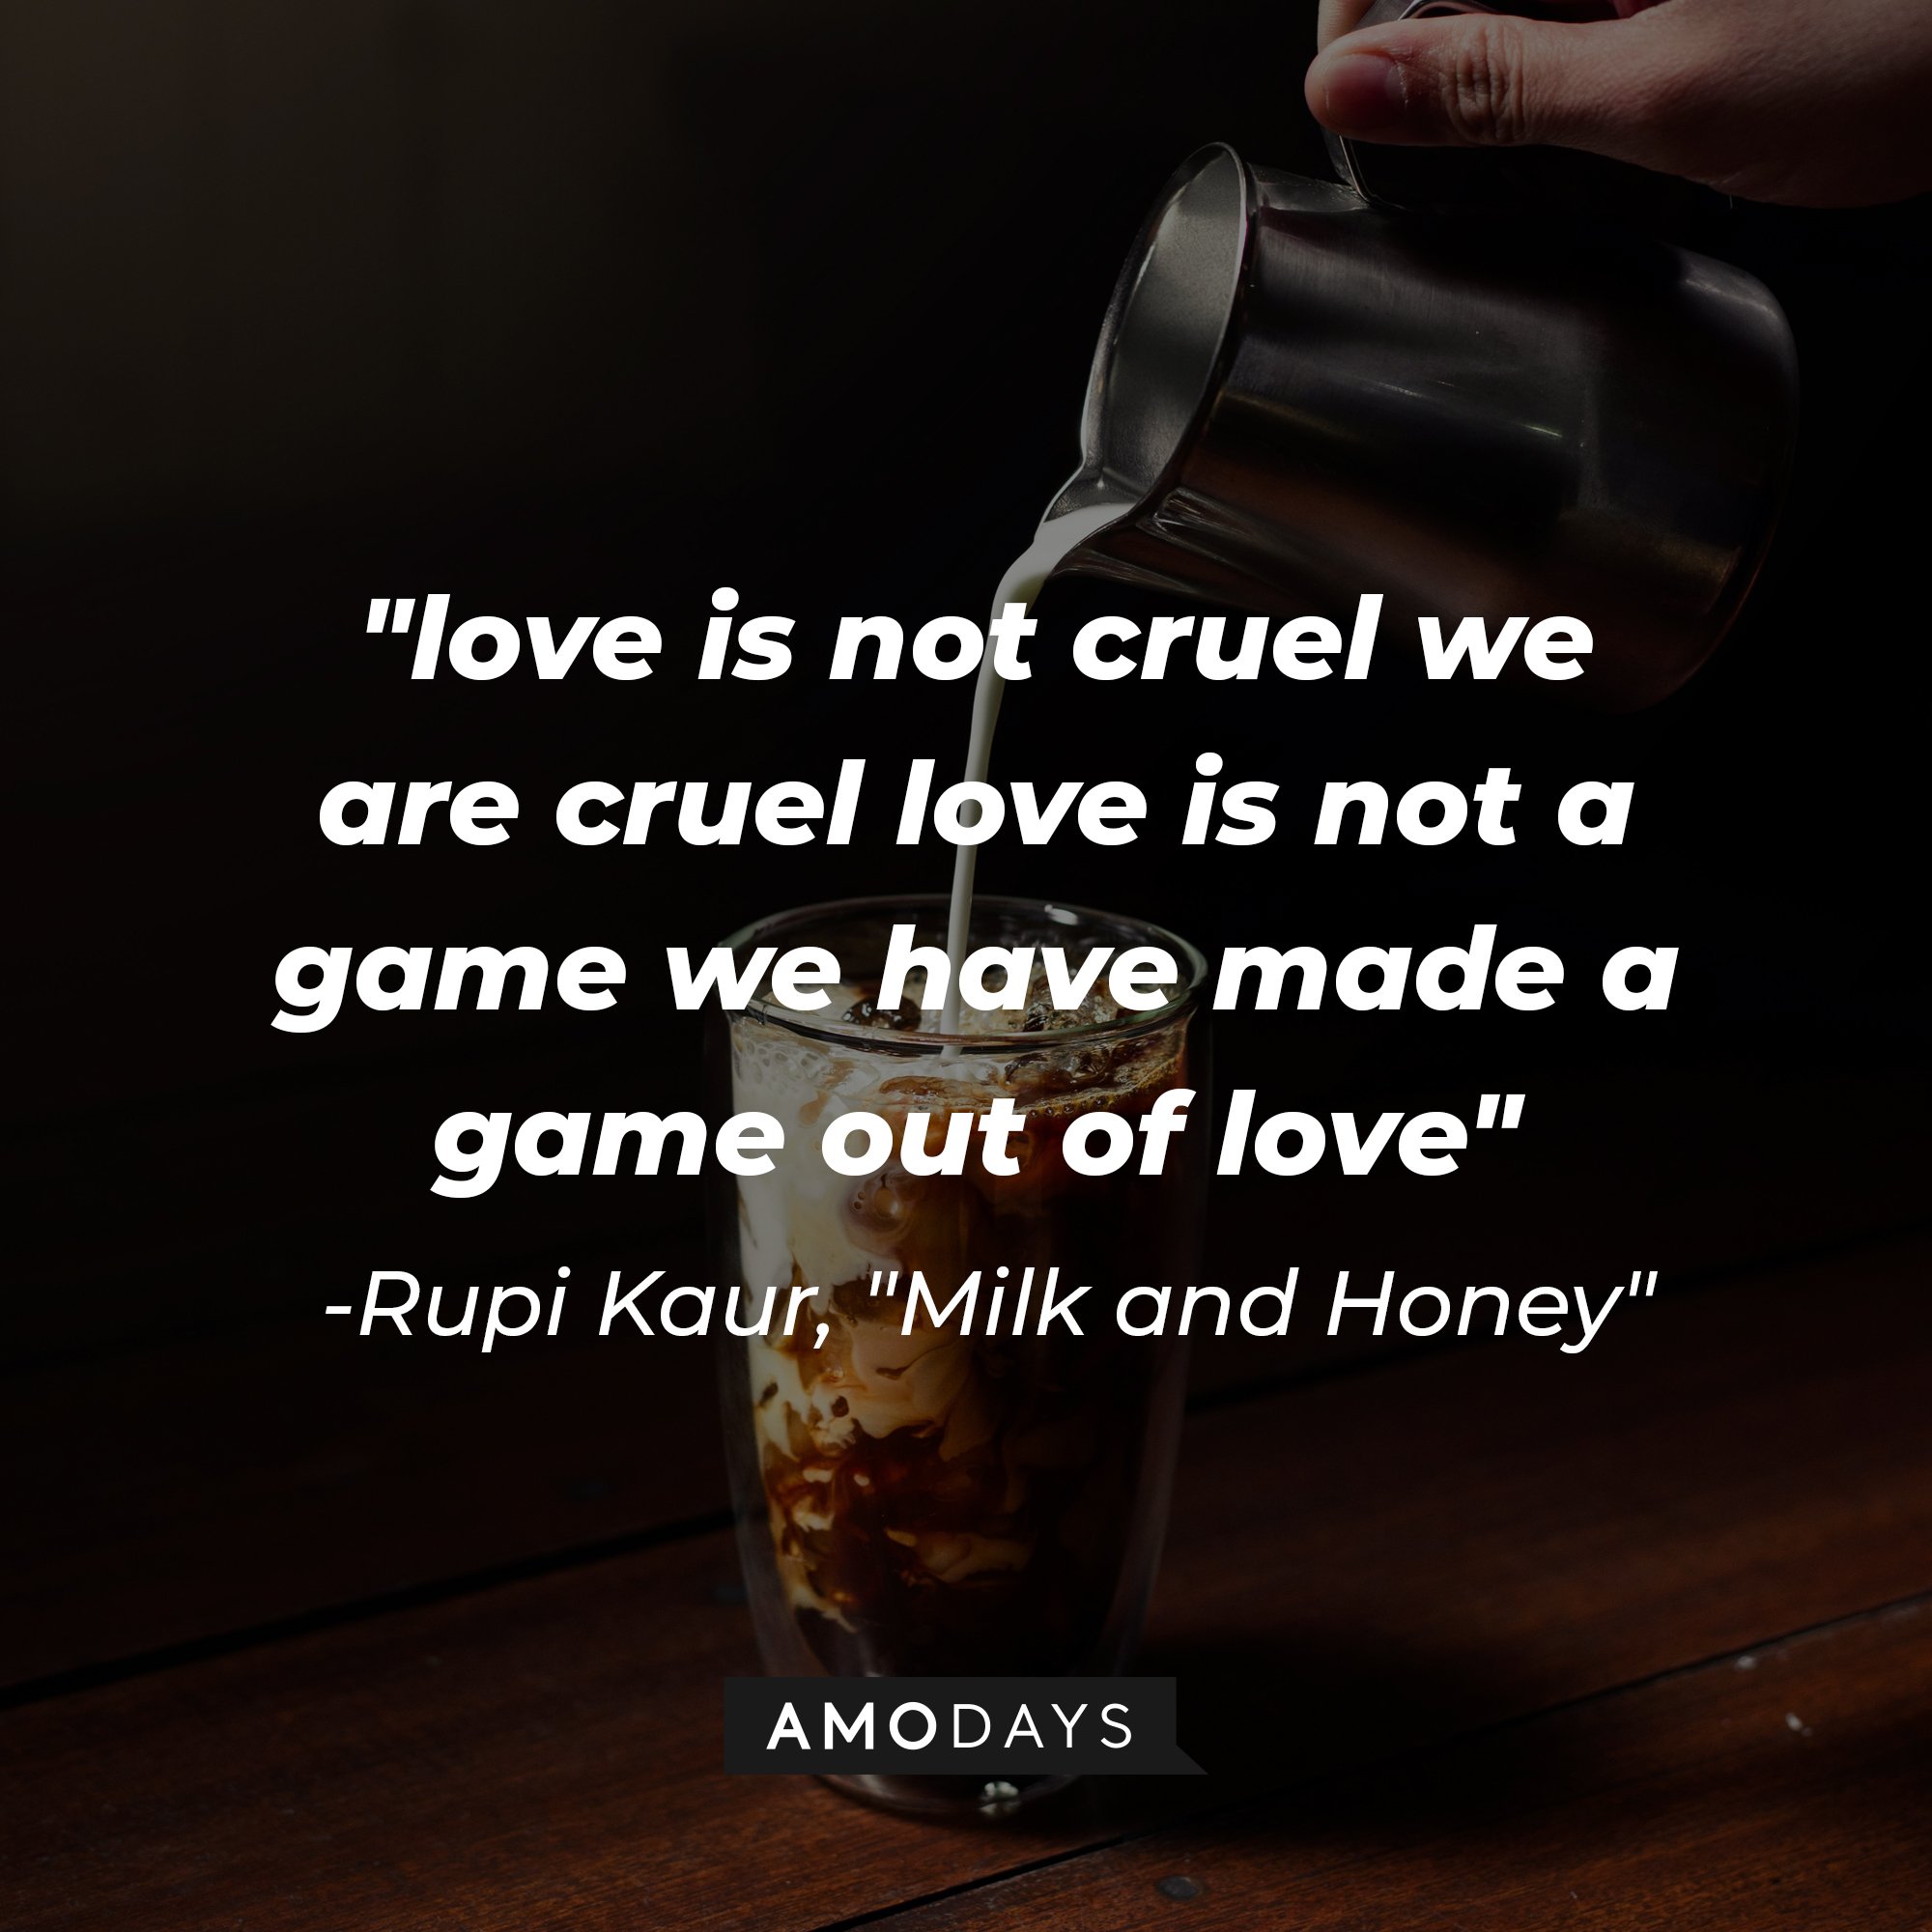 Rupi Kaur's "Milk and Honey" quote: "love is not cruel we are cruel love is not a game we have made a game out of love" | Image: AmoDays